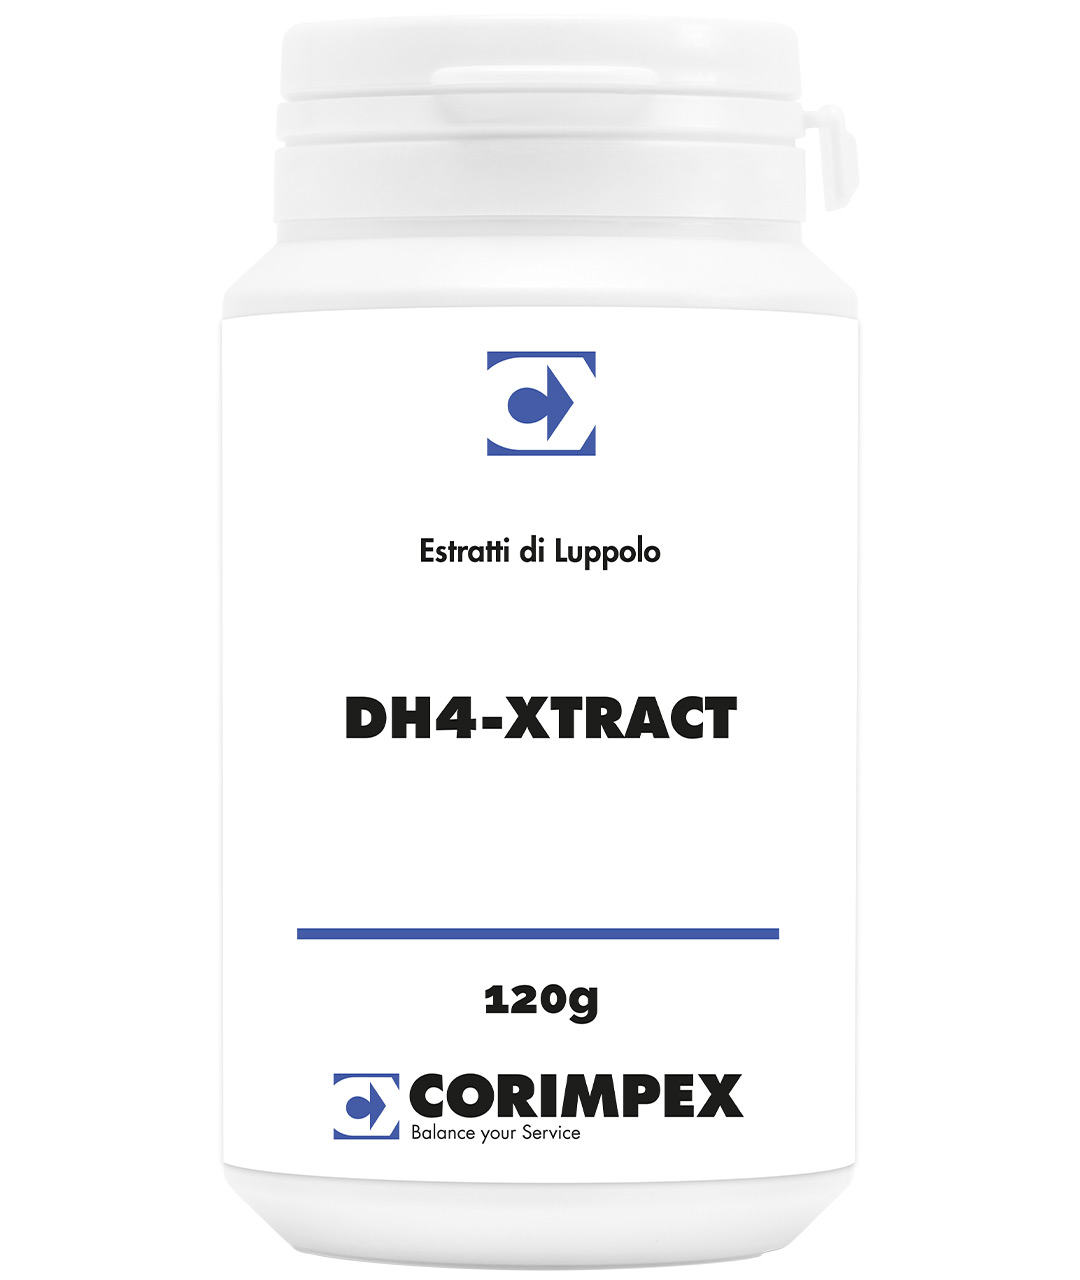 DH4-XTRACT